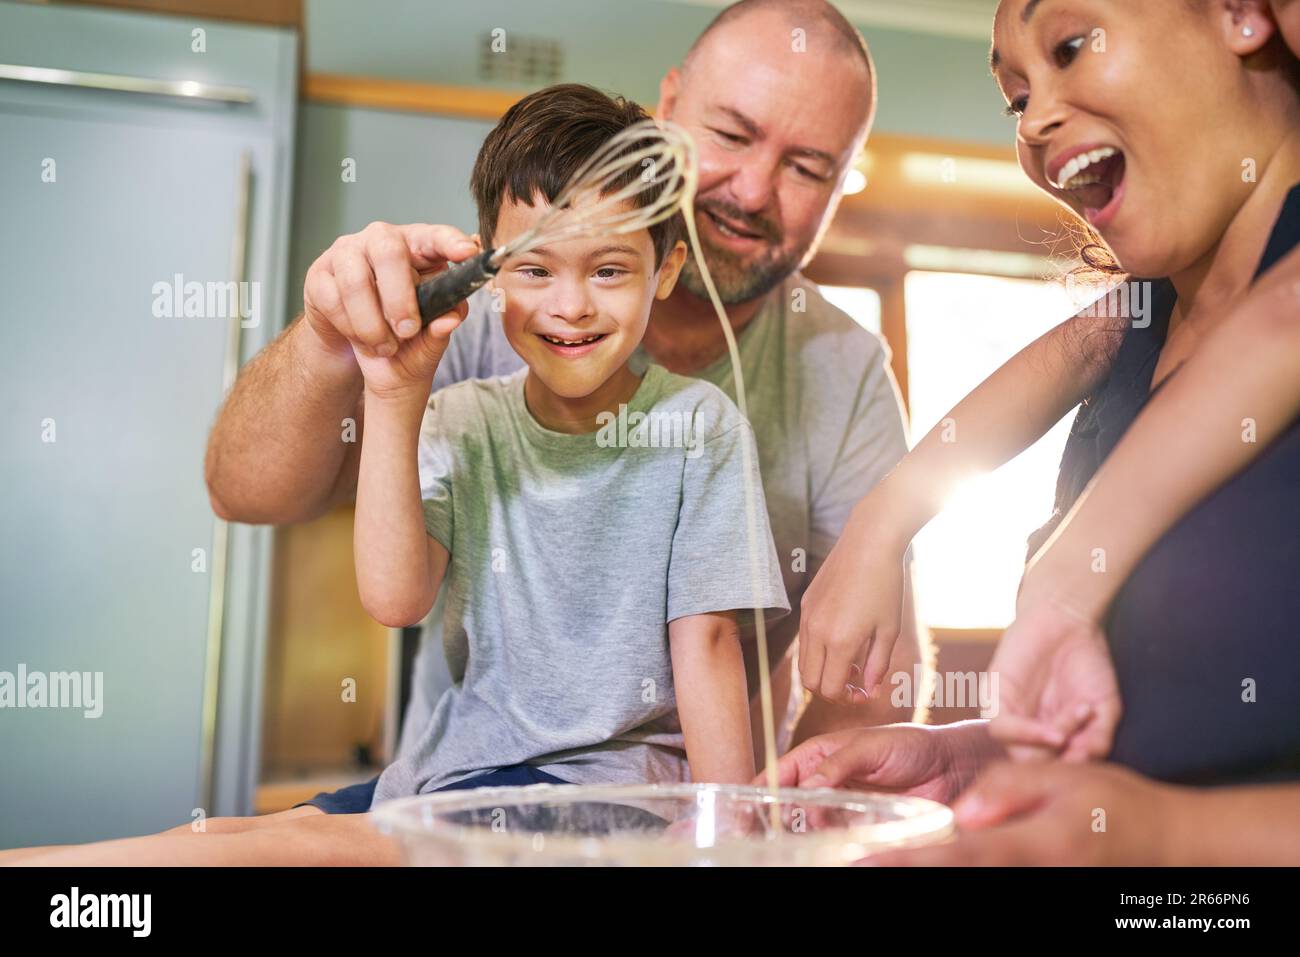 Happy boy with Down Syndrome baking with family at home Stock Photo